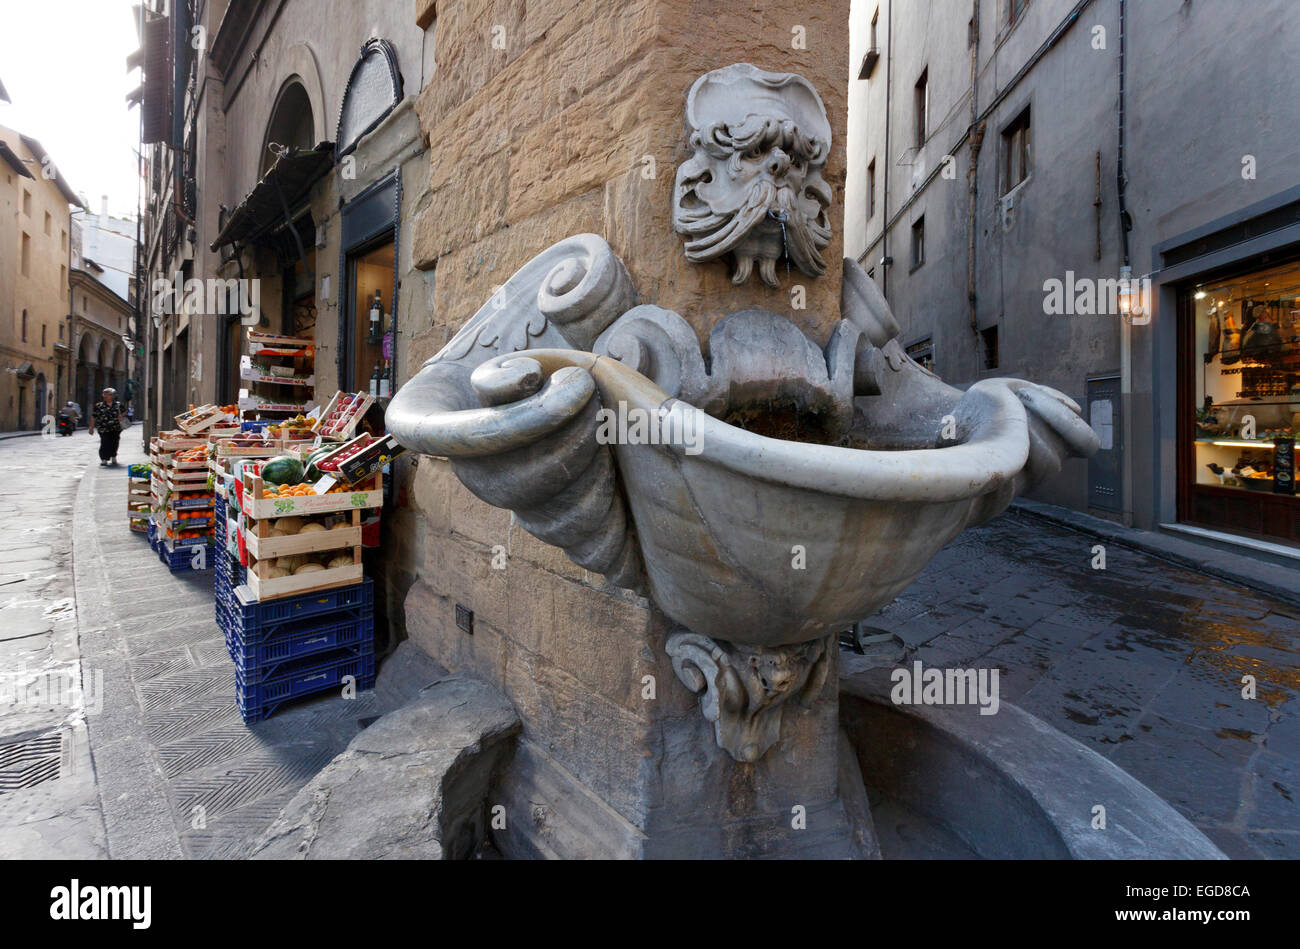 Fountain next to a fruit shop, Piazza Frescobaldi, historic centre of Florence, UNESCO World Heritage Site, Firenze, Florence, Tuscany, Italy, Europe Stock Photo